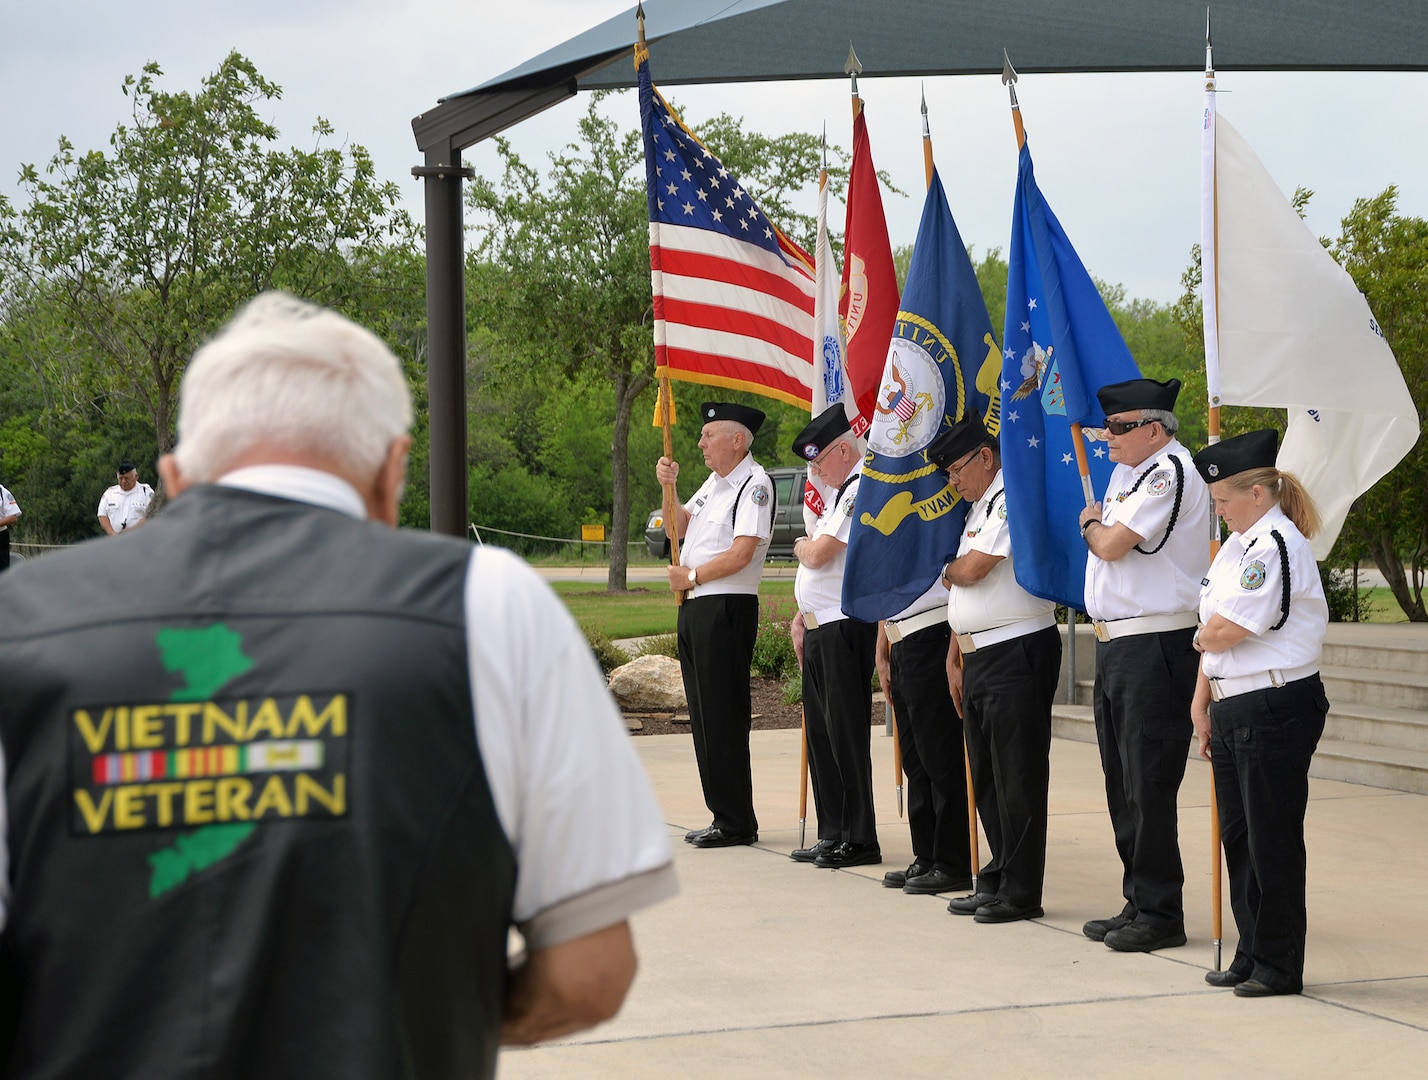 A Vietnam veteran pays his respects during the posting of the colors by the Fort Sam Houston Memorial Services Detachment at the beginning of the ceremony for the 50th Anniversary of the Commemoration of the Vietnam War at the Fort Sam Houston National Cemetery March 27.